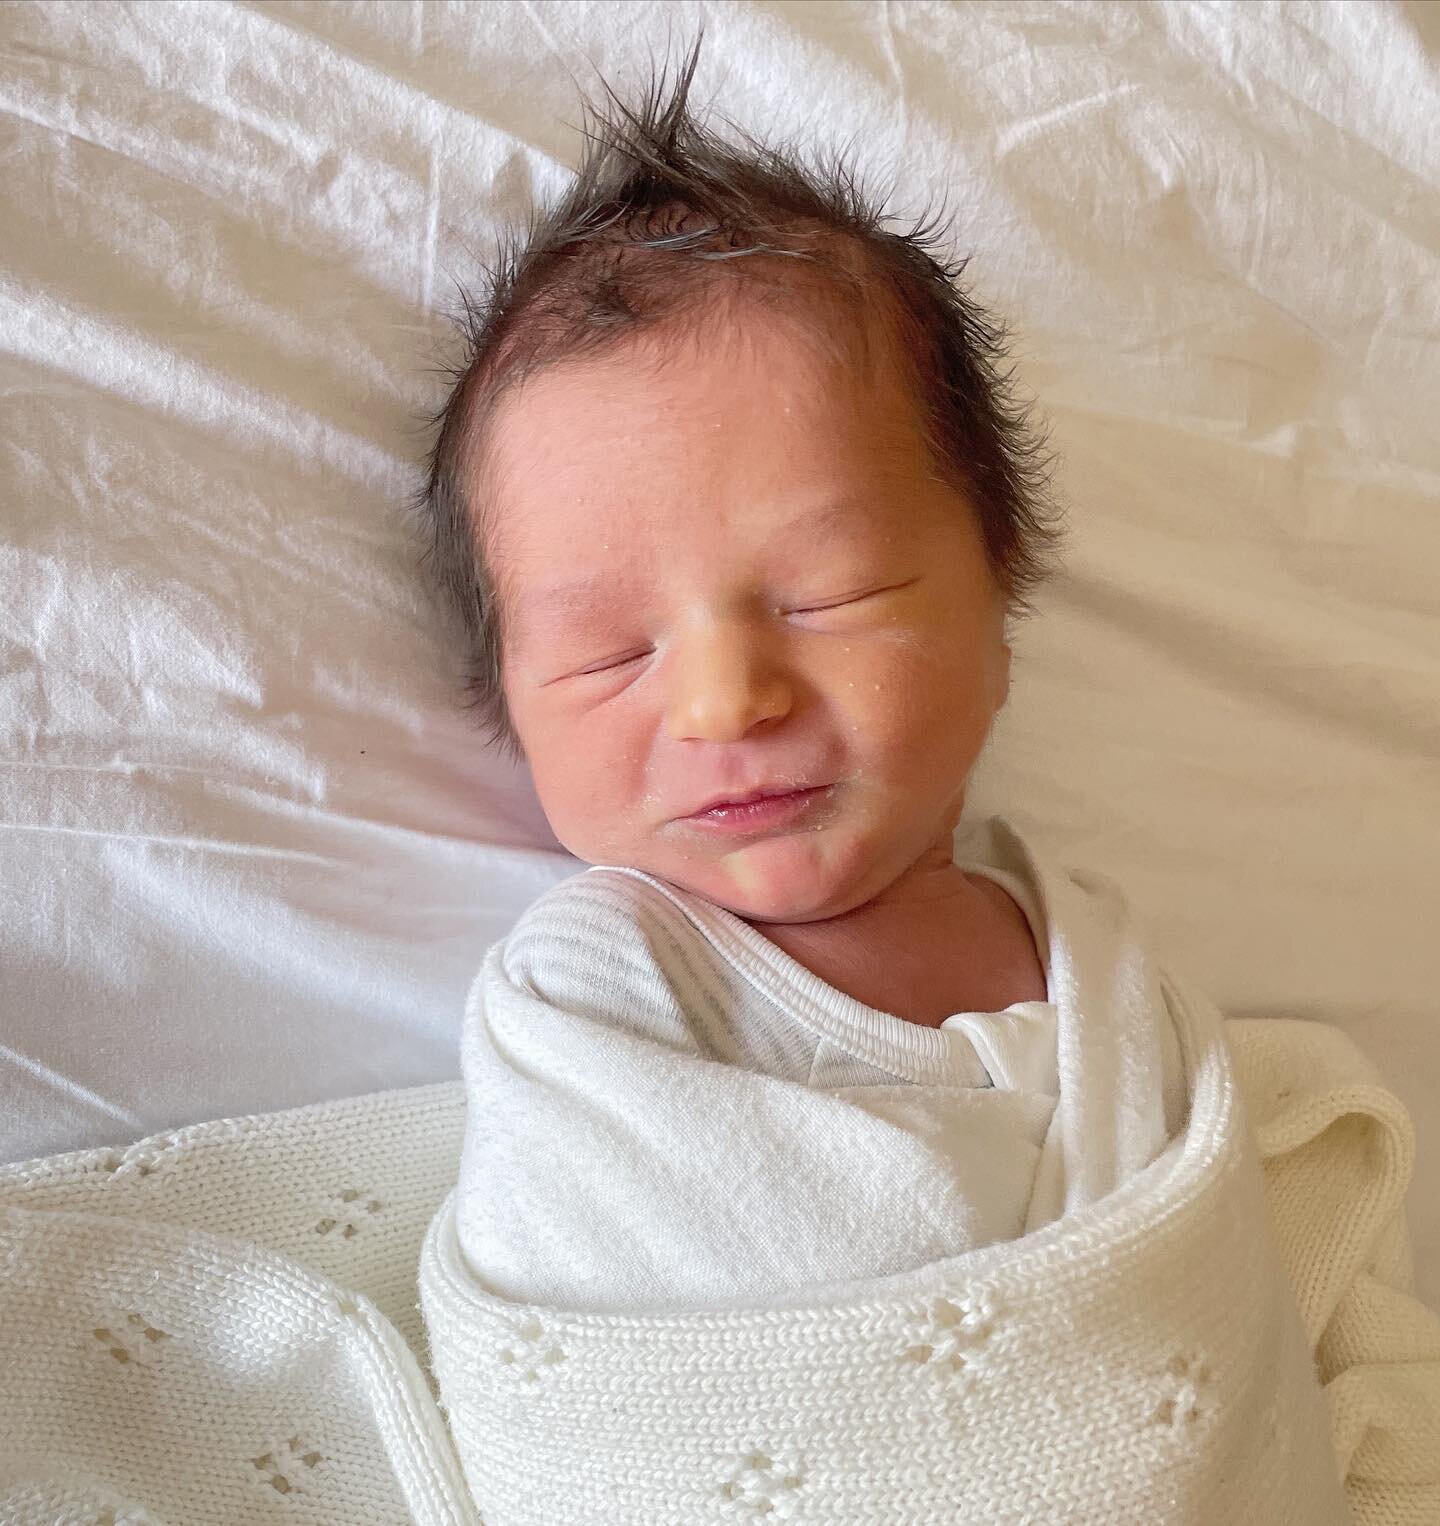 Introducing baby NARLO 💙💙
Our newest member of the Mahala family. 
Congratulations to our Mel on the arrival of their precious little boy. 
.
#mahalaskinandbeauty #perthgirlboss #perthbeautysalon #perthbookings #perthbeauty #perthsalon #perthskinan